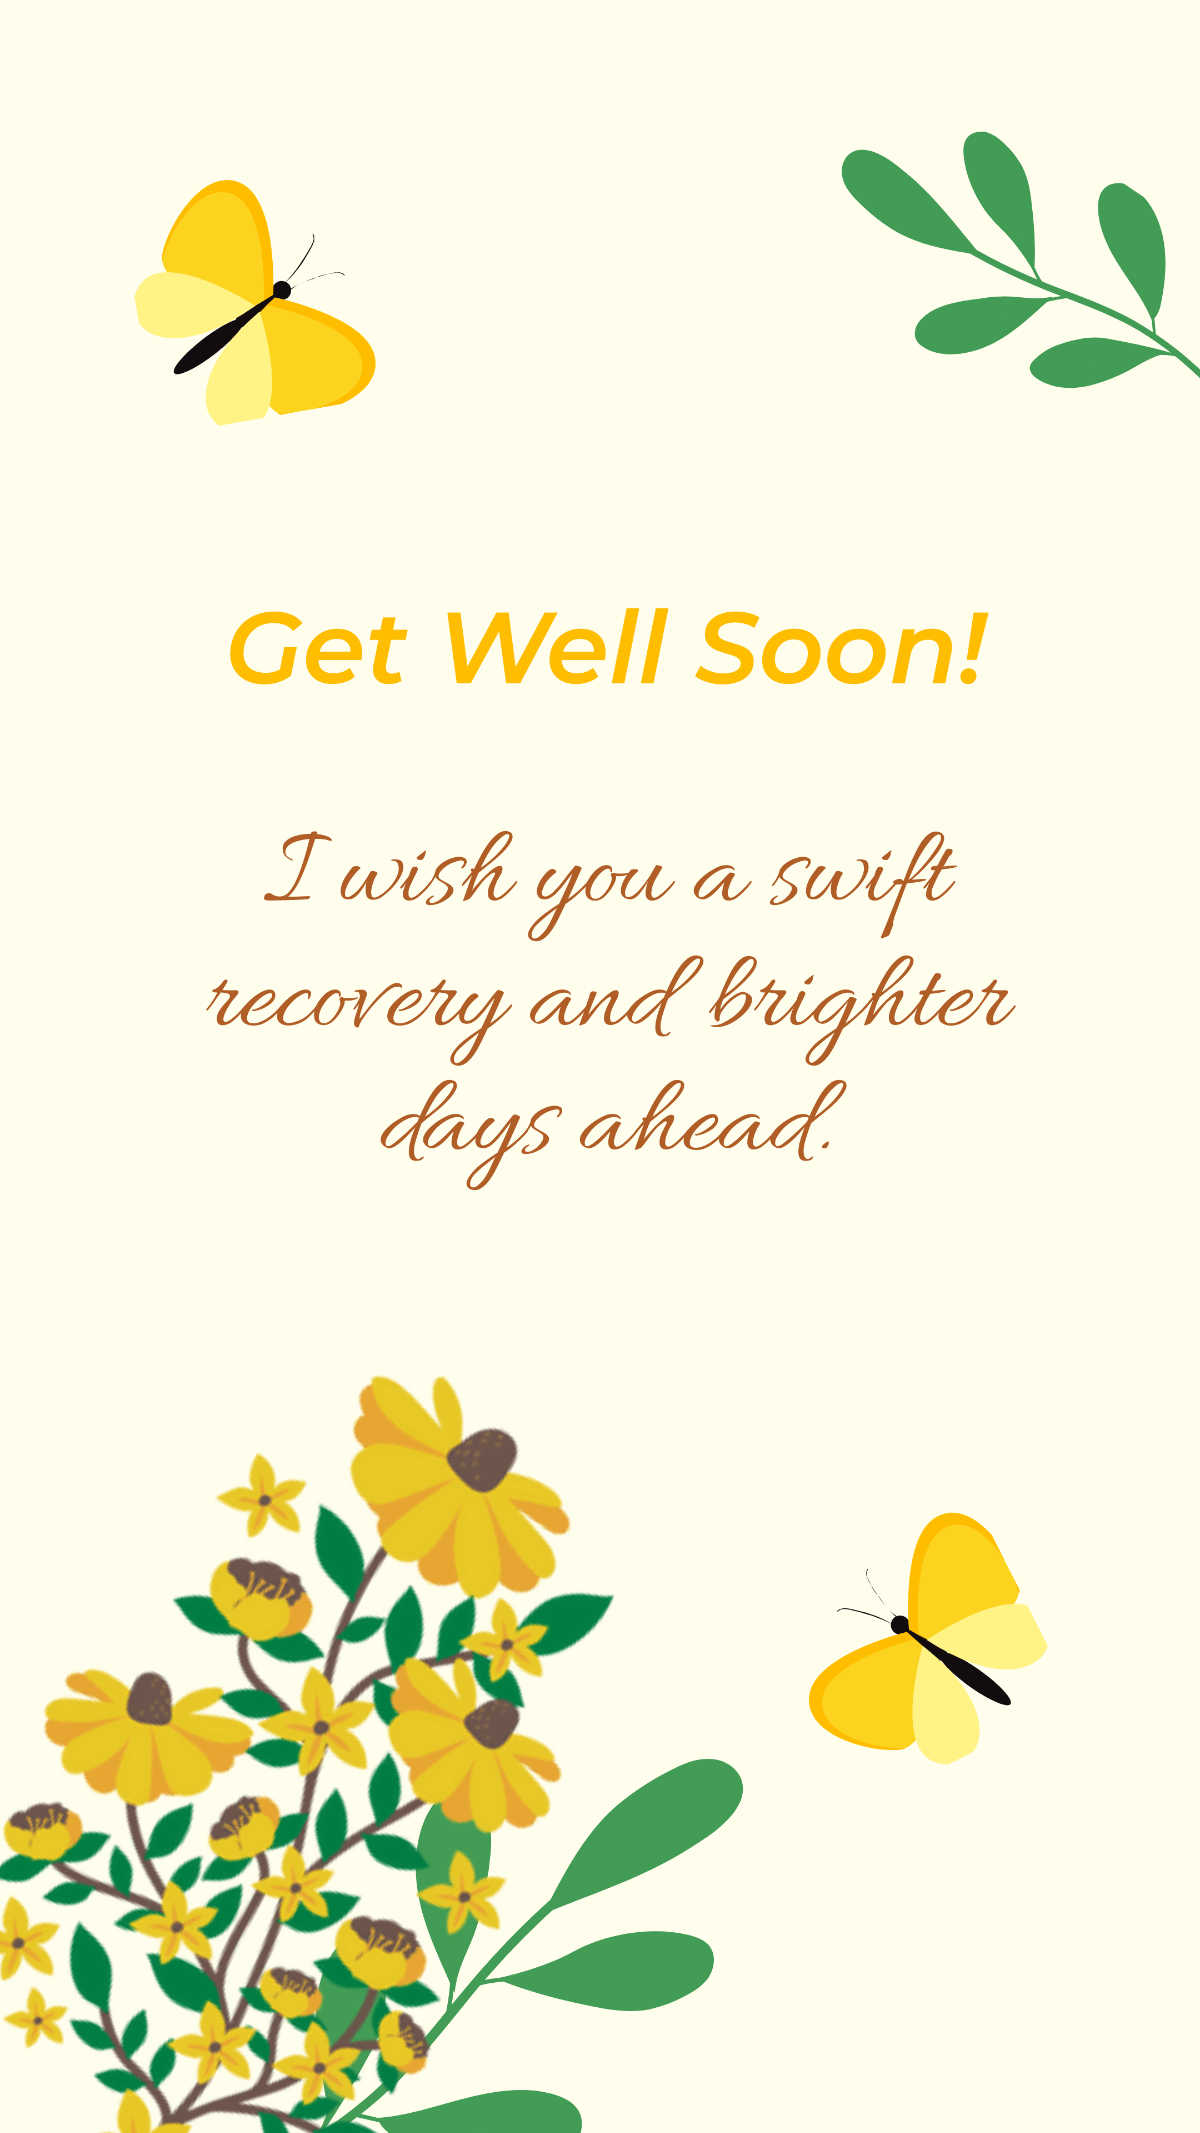 Get Well Soon Greeting Gift Card Template